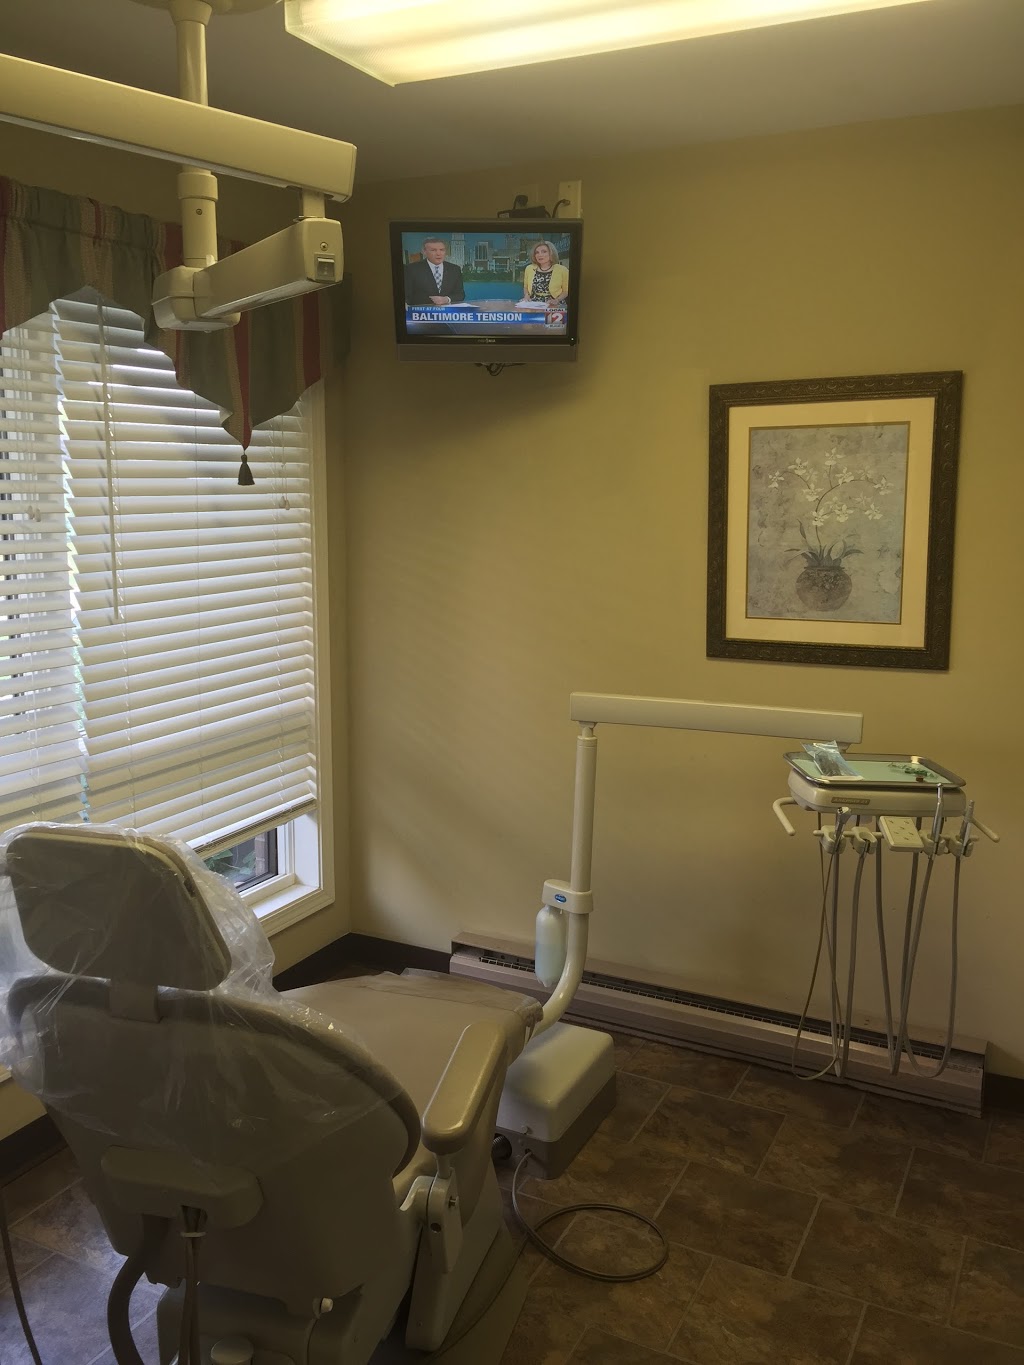 Naas Family Dentistry: Naas J Matthew DMD | 6565 Taylor Mill Rd # 1, Independence, KY 41051, USA | Phone: (859) 363-9200